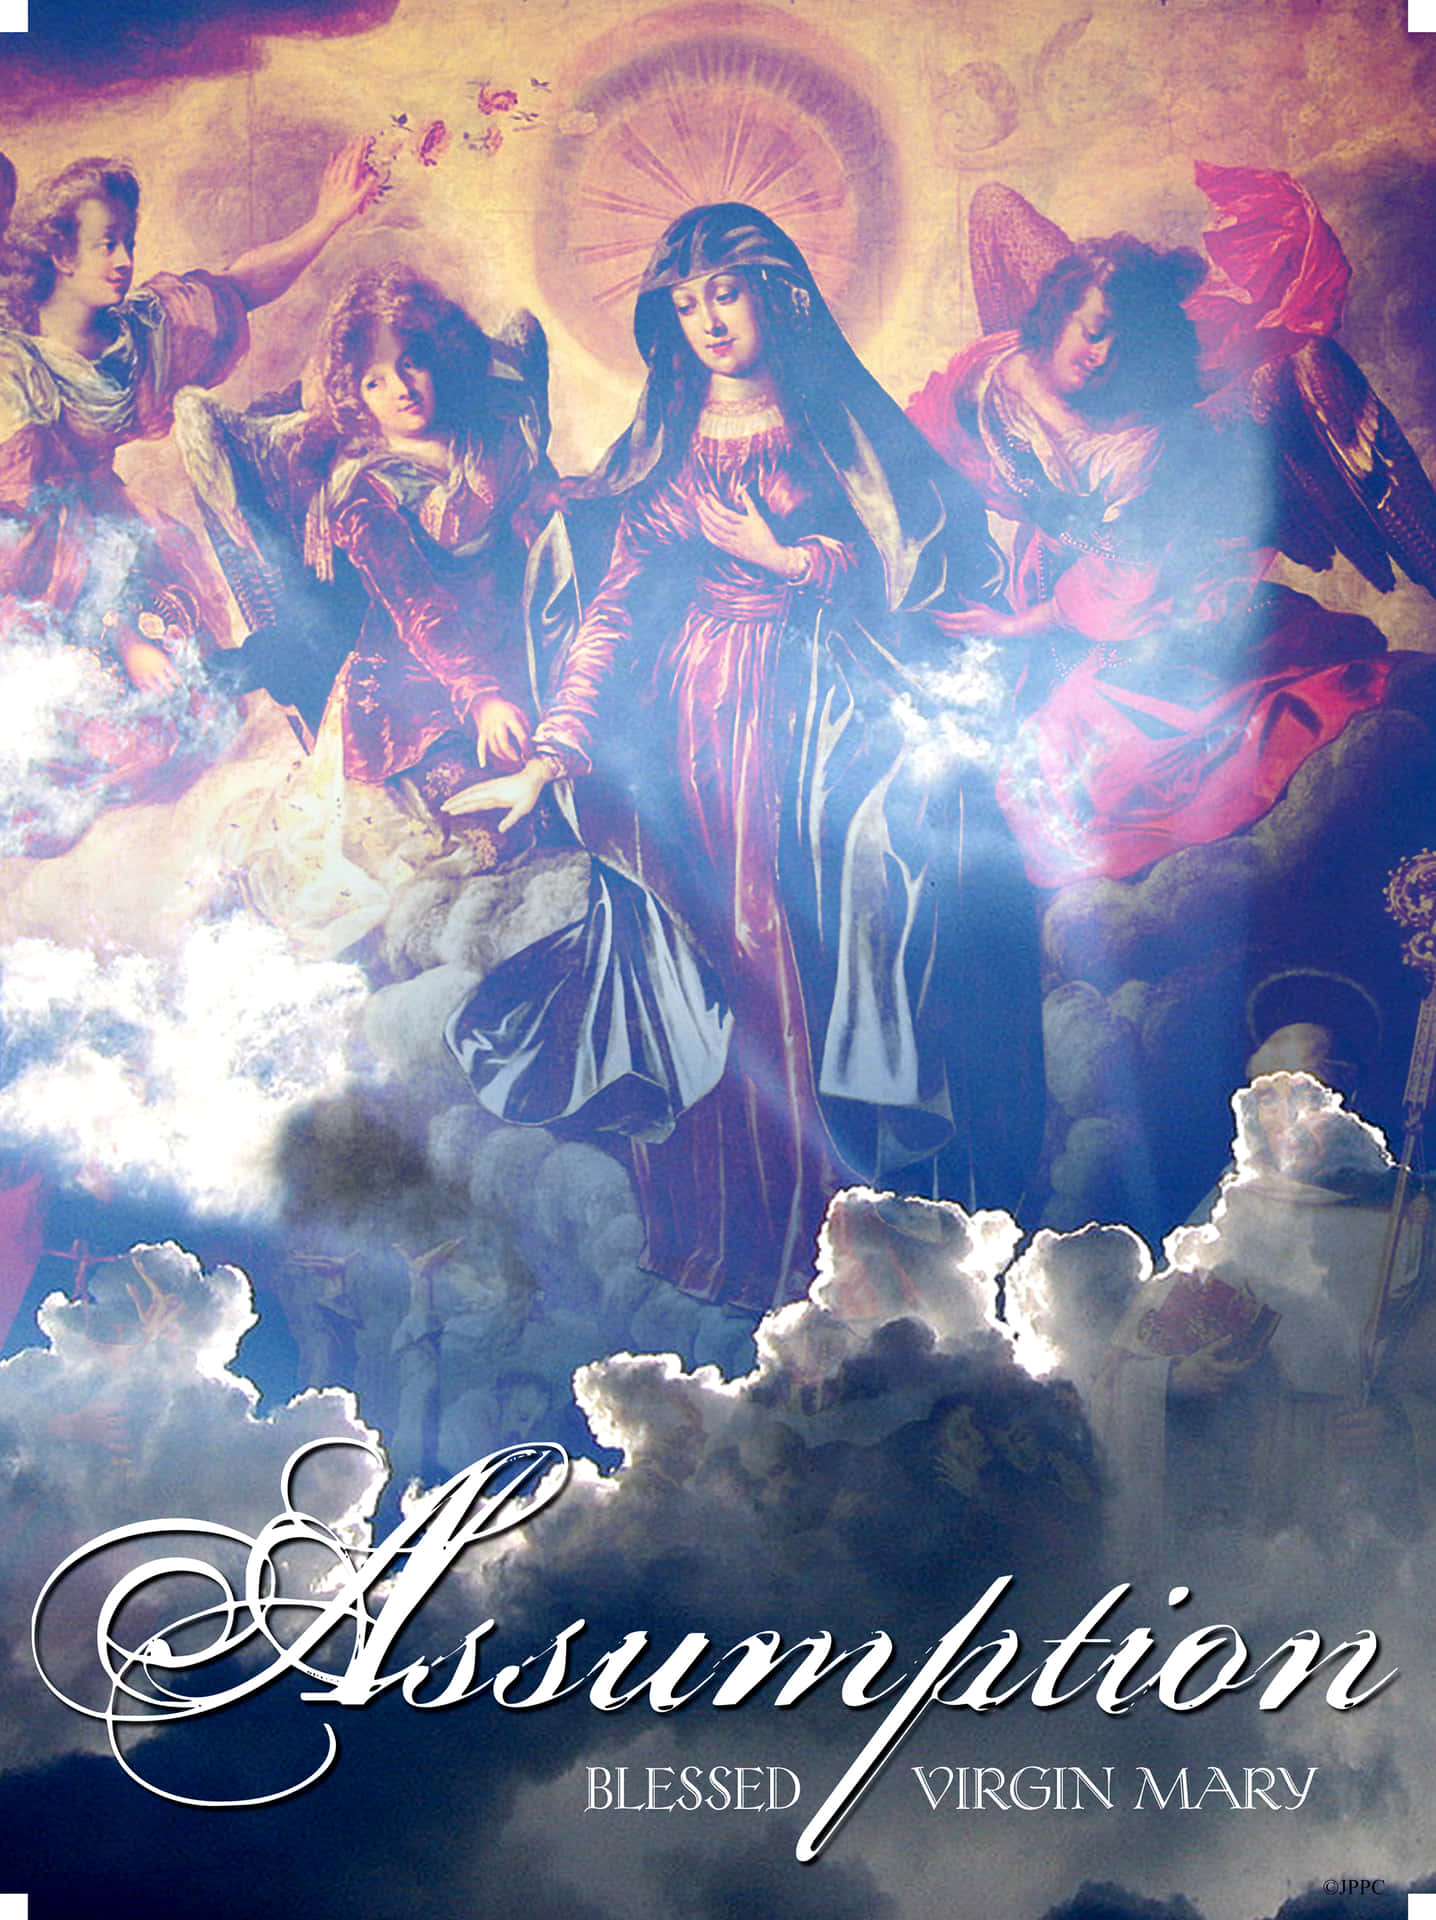 Download Divine Ascension Of Mother Mary Wallpaper | Wallpapers.com